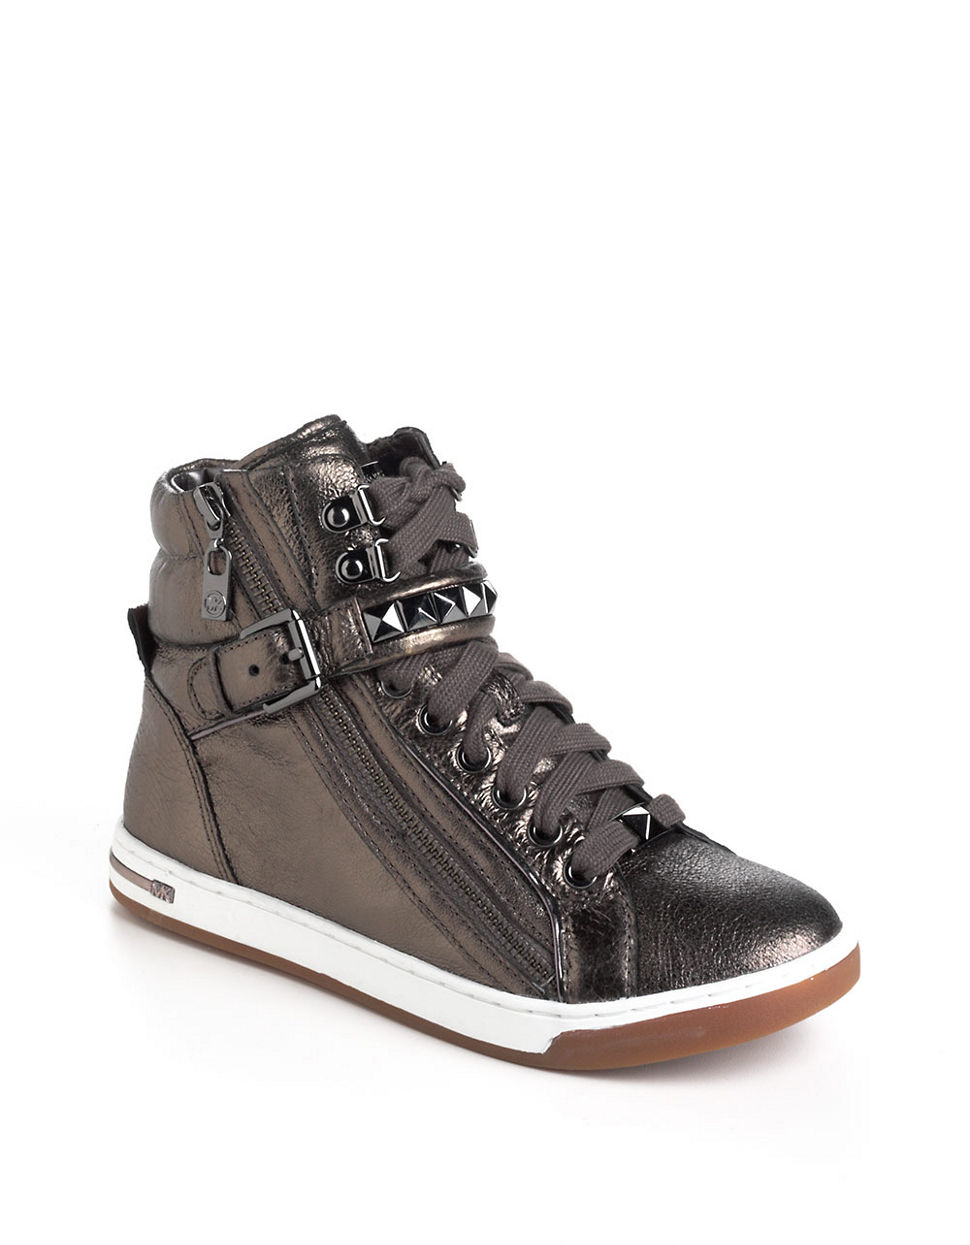 Lyst - MICHAEL Michael Kors Glam Studded Leather High Top Sneakers in ...